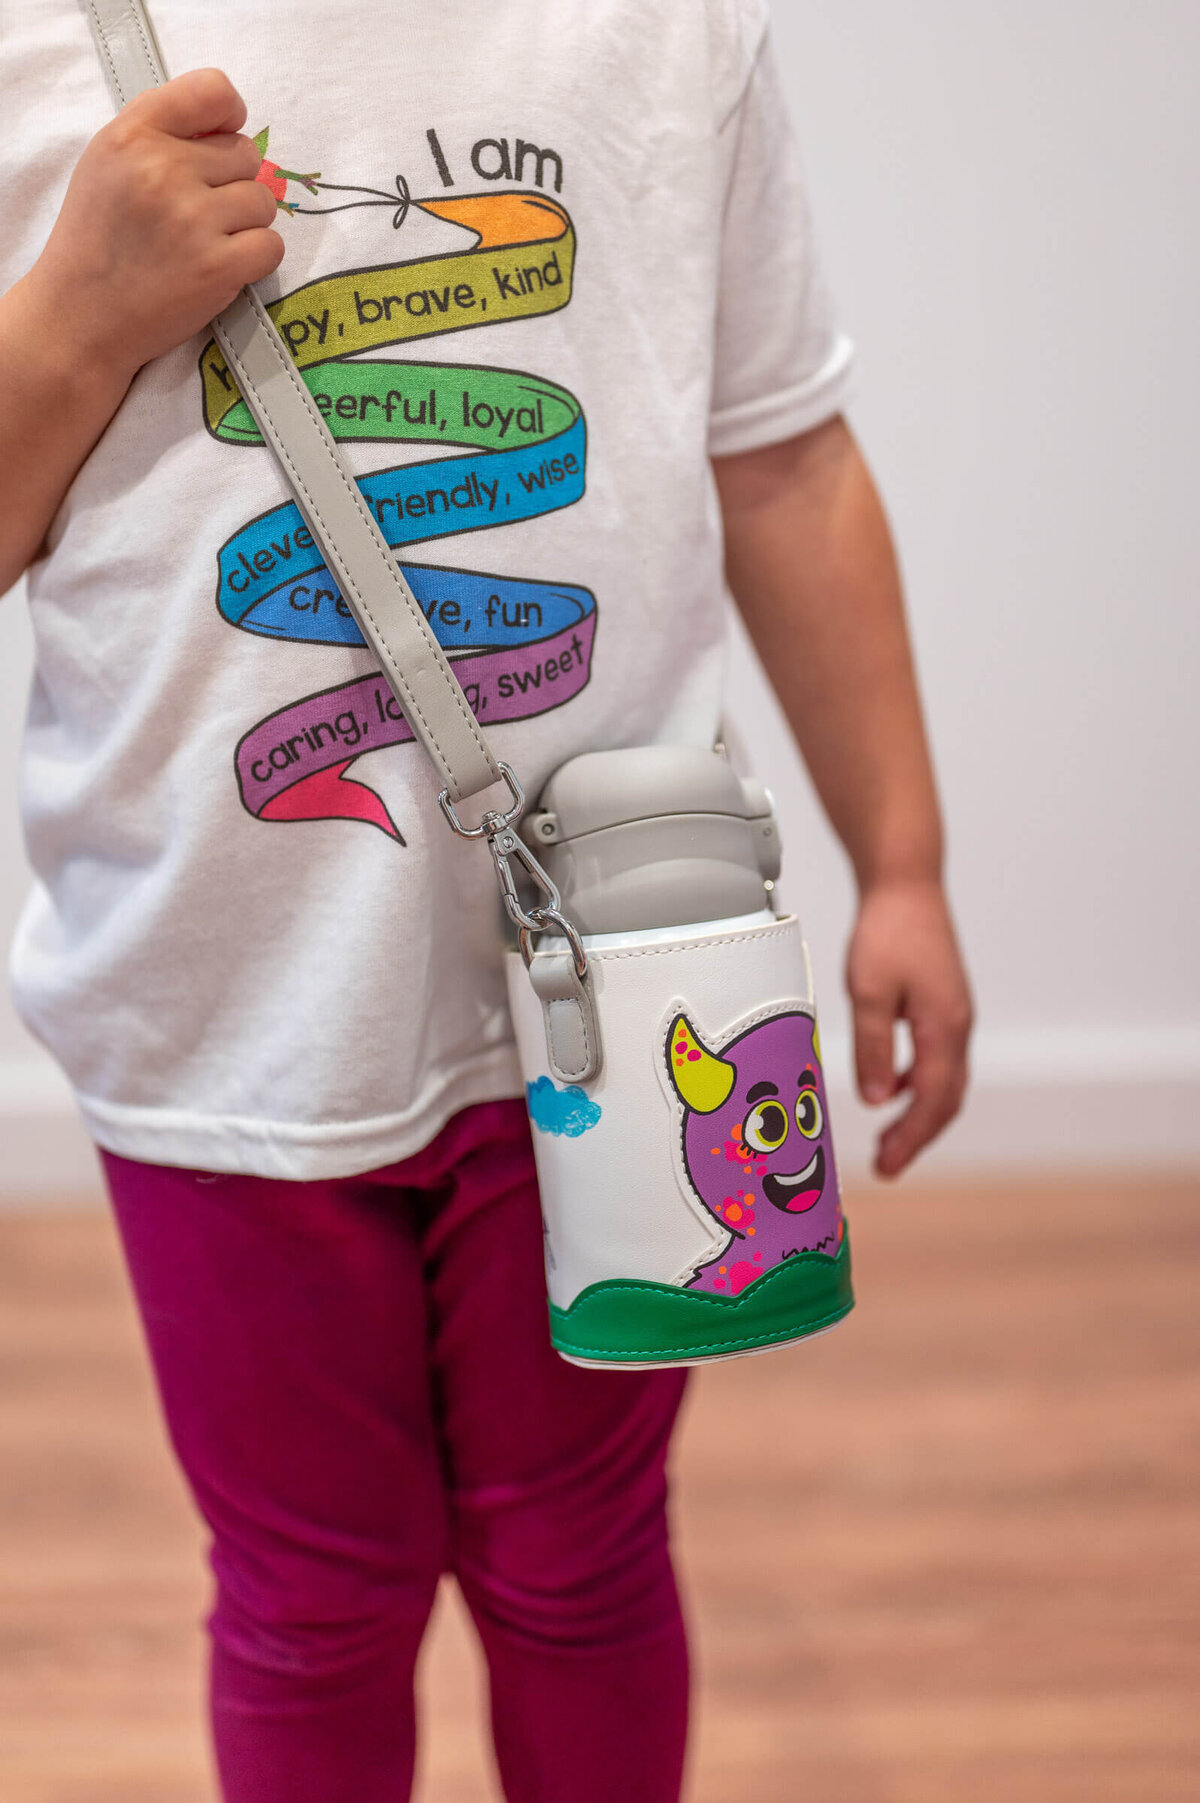 Close up of a girl wearing a white tshirt with words "I am happy, brave, kind, powerful, loyal, fun, friendly, caring" while wearing  a crossbody strap holding a kid's water bottle for commercial brand Luua, located in Wilton, CT.